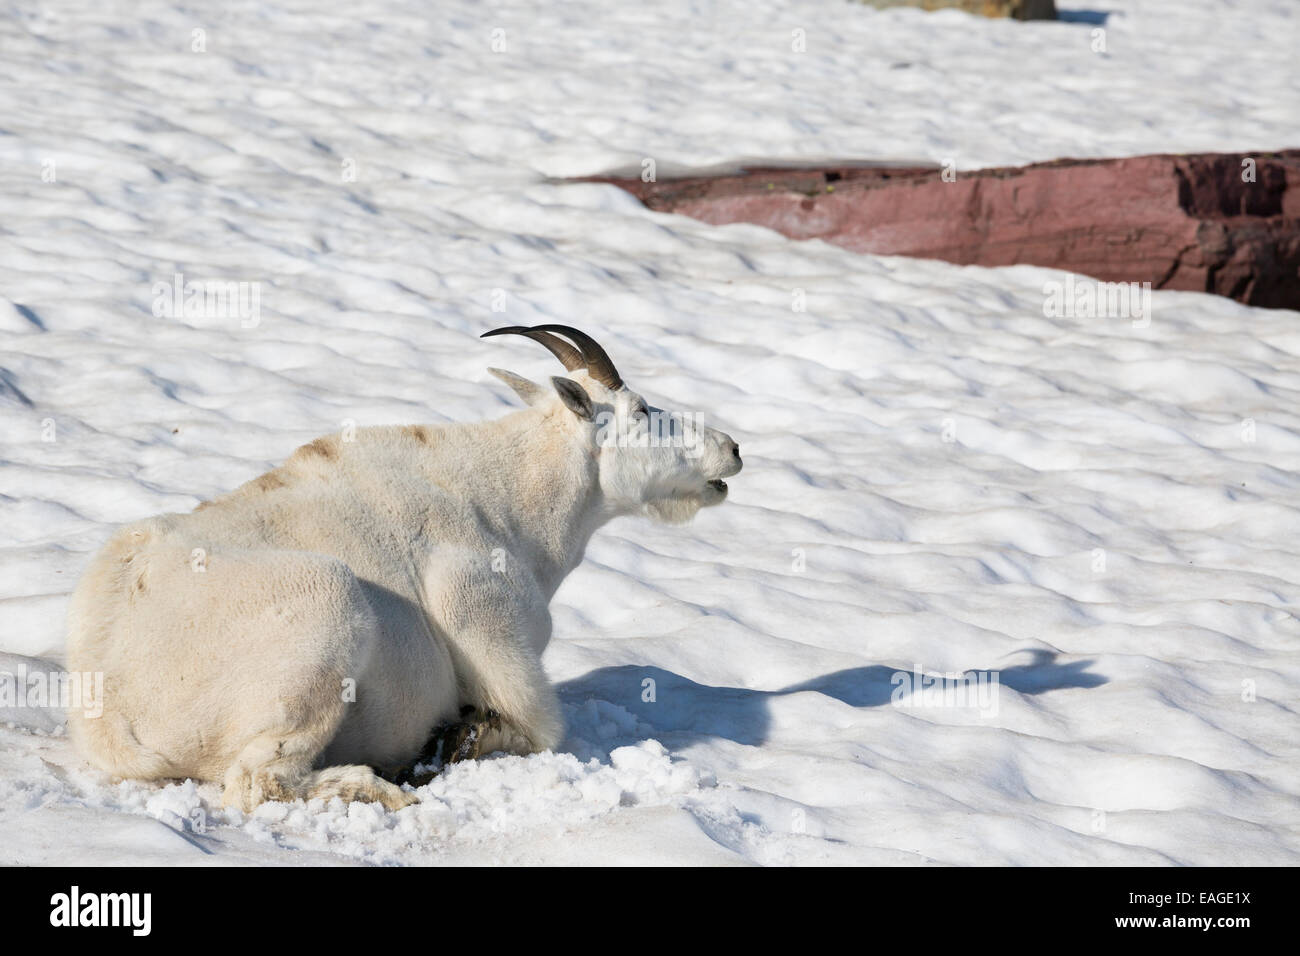 A mountain goat lies on a snow field in Glacier National Park, Montana. Stock Photo